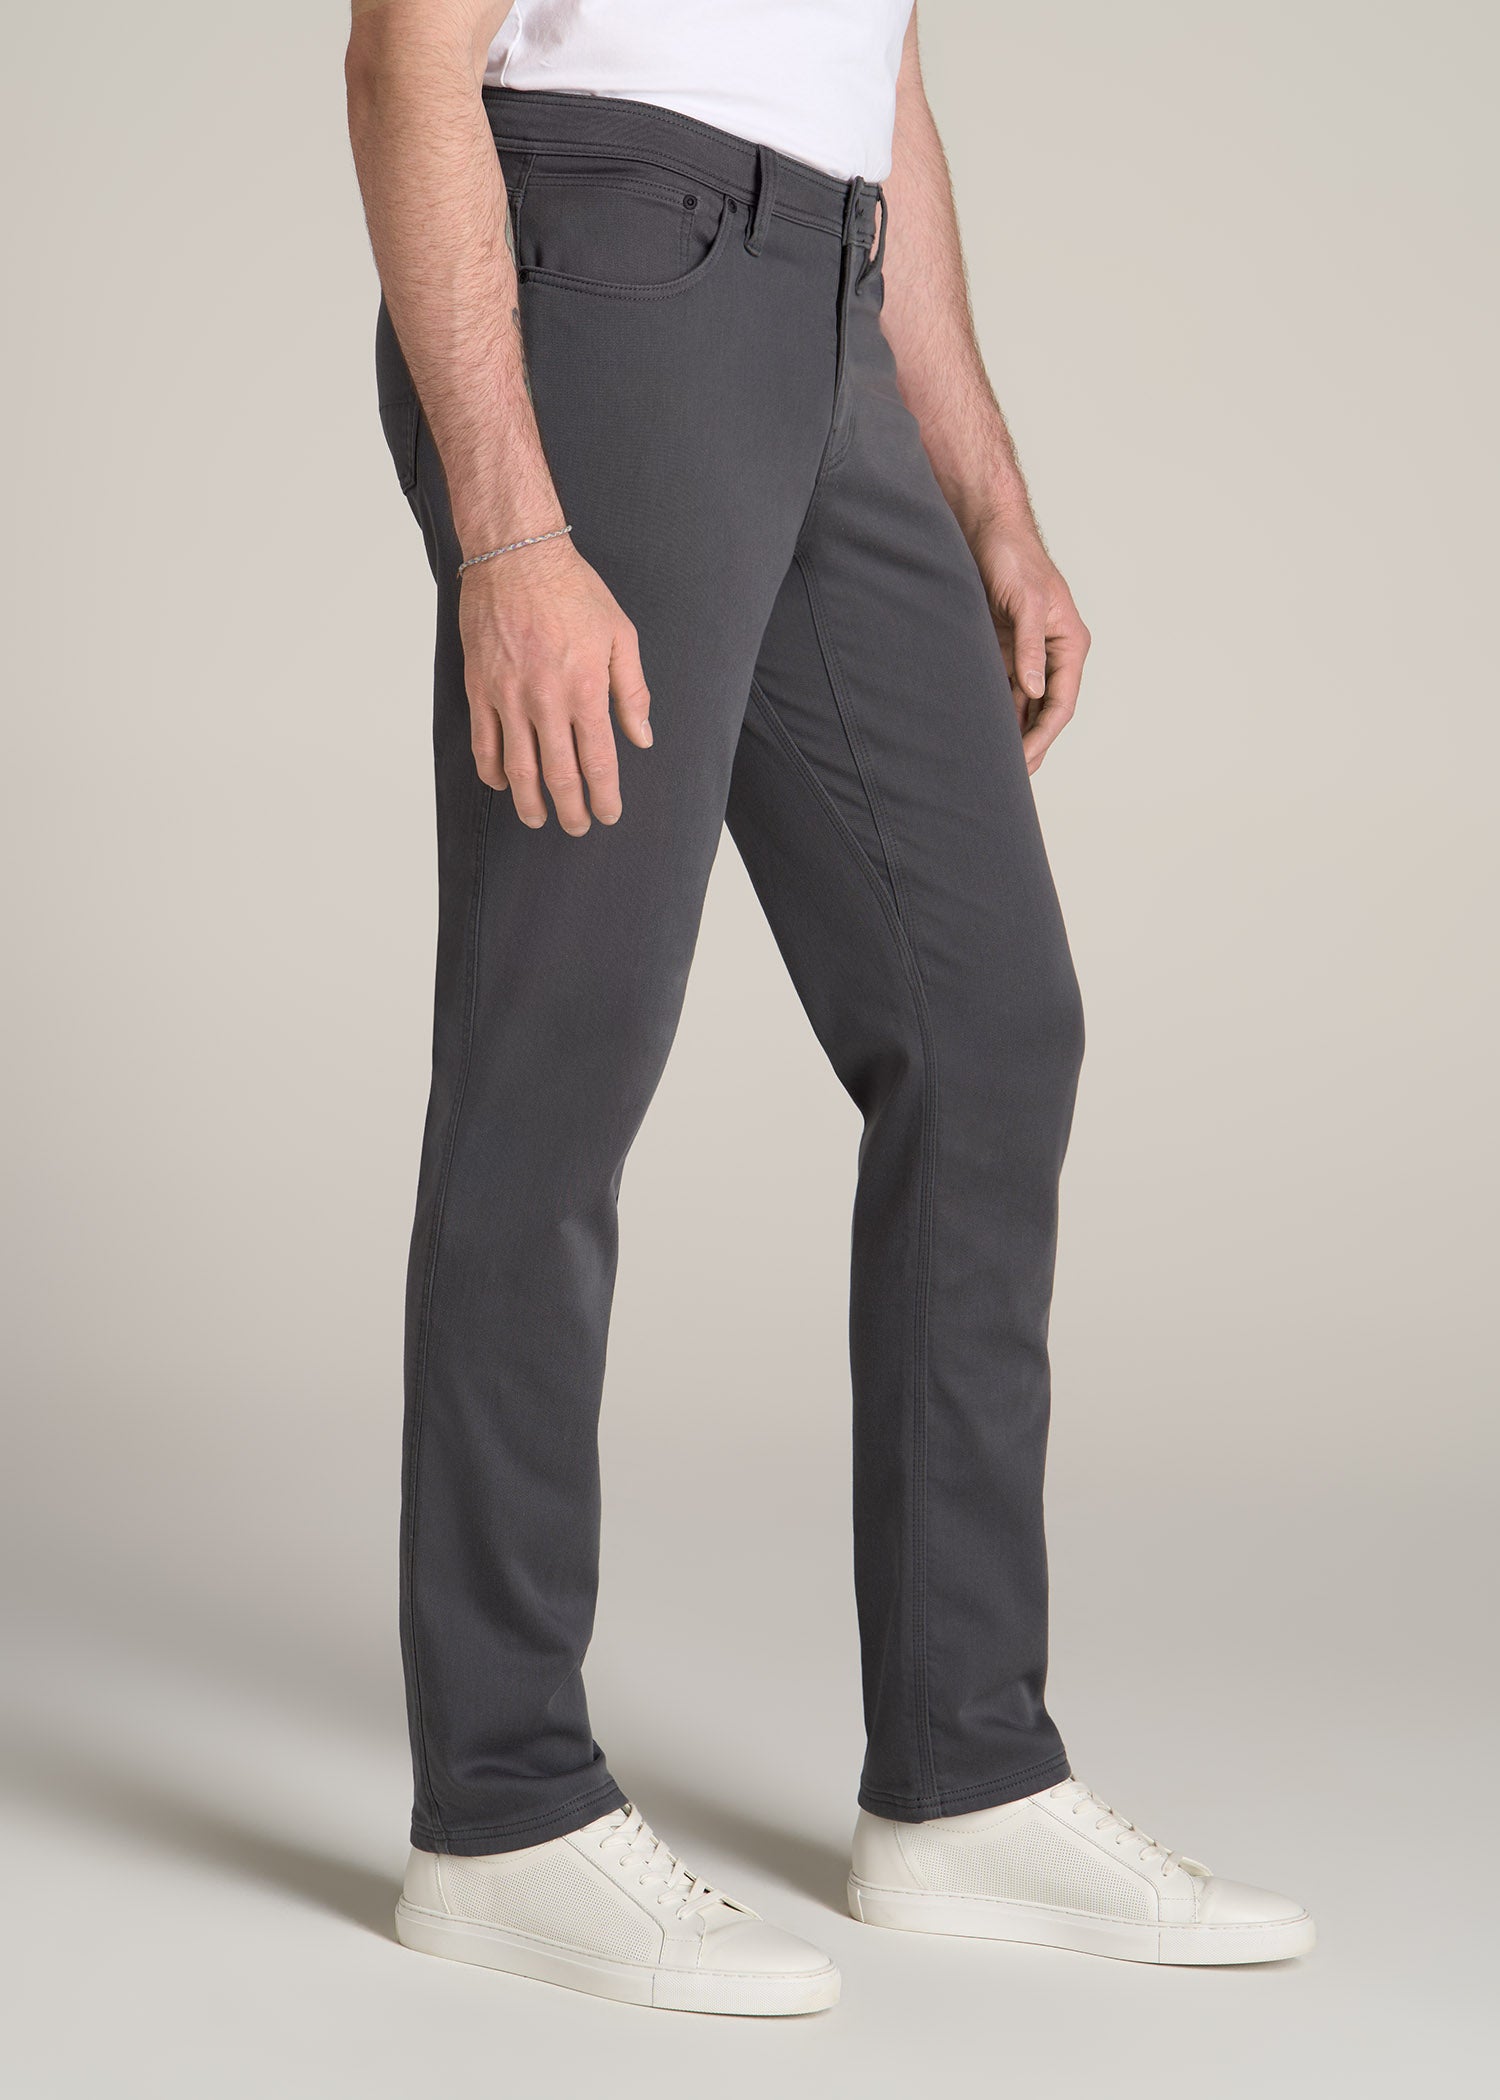 Tall Men's Clothing | Clothing for Tall Men | American Tall